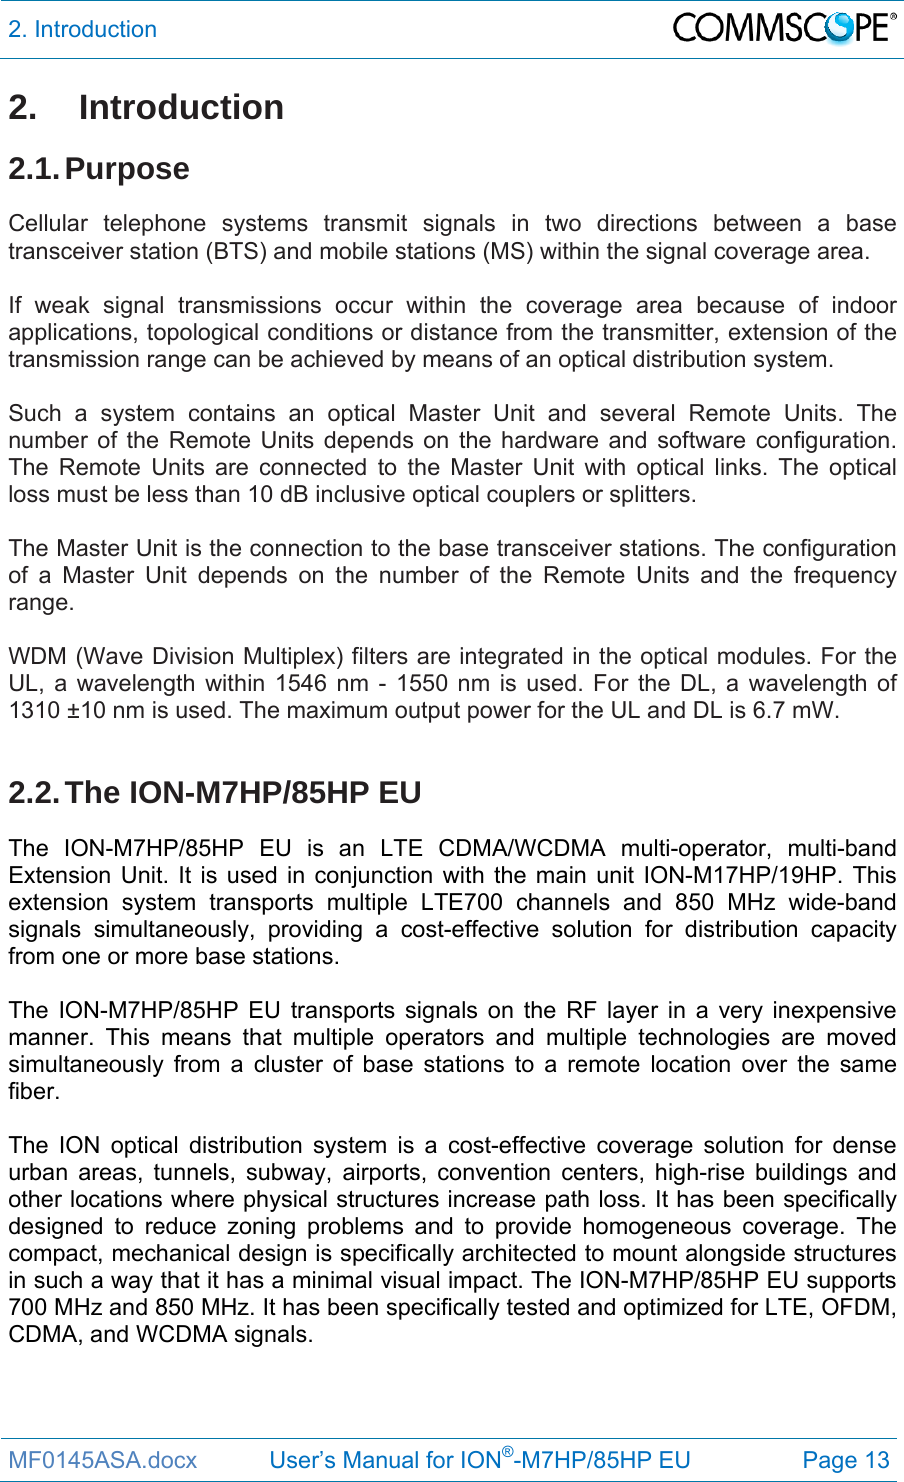 2. Introduction  MF0145ASA.docx           User’s Manual for ION®-M7HP/85HP EU  Page 13 2. Introduction 2.1. Purpose Cellular telephone systems transmit signals in two directions between a base transceiver station (BTS) and mobile stations (MS) within the signal coverage area.  If weak signal transmissions occur within the coverage area because of indoor applications, topological conditions or distance from the transmitter, extension of the transmission range can be achieved by means of an optical distribution system.  Such a system contains an optical Master Unit and several Remote Units. The number of the Remote Units depends on the hardware and software configuration. The Remote Units are connected to the Master Unit with optical links. The optical loss must be less than 10 dB inclusive optical couplers or splitters.  The Master Unit is the connection to the base transceiver stations. The configuration of a Master Unit depends on the number of the Remote Units and the frequency range.   WDM (Wave Division Multiplex) filters are integrated in the optical modules. For the UL, a wavelength within 1546 nm - 1550 nm is used. For the DL, a wavelength of 1310 ±10 nm is used. The maximum output power for the UL and DL is 6.7 mW.  2.2. The  ION-M7HP/85HP  EU The ION-M7HP/85HP EU is an LTE CDMA/WCDMA multi-operator, multi-band Extension Unit. It is used in conjunction with the main unit ION-M17HP/19HP. This extension system transports multiple LTE700 channels and 850 MHz wide-band signals simultaneously, providing a cost-effective solution for distribution capacity from one or more base stations.  The ION-M7HP/85HP EU transports signals on the RF layer in a very inexpensive manner. This means that multiple operators and multiple technologies are moved simultaneously from a cluster of base stations to a remote location over the same fiber.  The ION optical distribution system is a cost-effective coverage solution for dense urban areas, tunnels, subway, airports, convention centers, high-rise buildings and other locations where physical structures increase path loss. It has been specifically designed to reduce zoning problems and to provide homogeneous coverage. The compact, mechanical design is specifically architected to mount alongside structures in such a way that it has a minimal visual impact. The ION-M7HP/85HP EU supports 700 MHz and 850 MHz. It has been specifically tested and optimized for LTE, OFDM, CDMA, and WCDMA signals.    